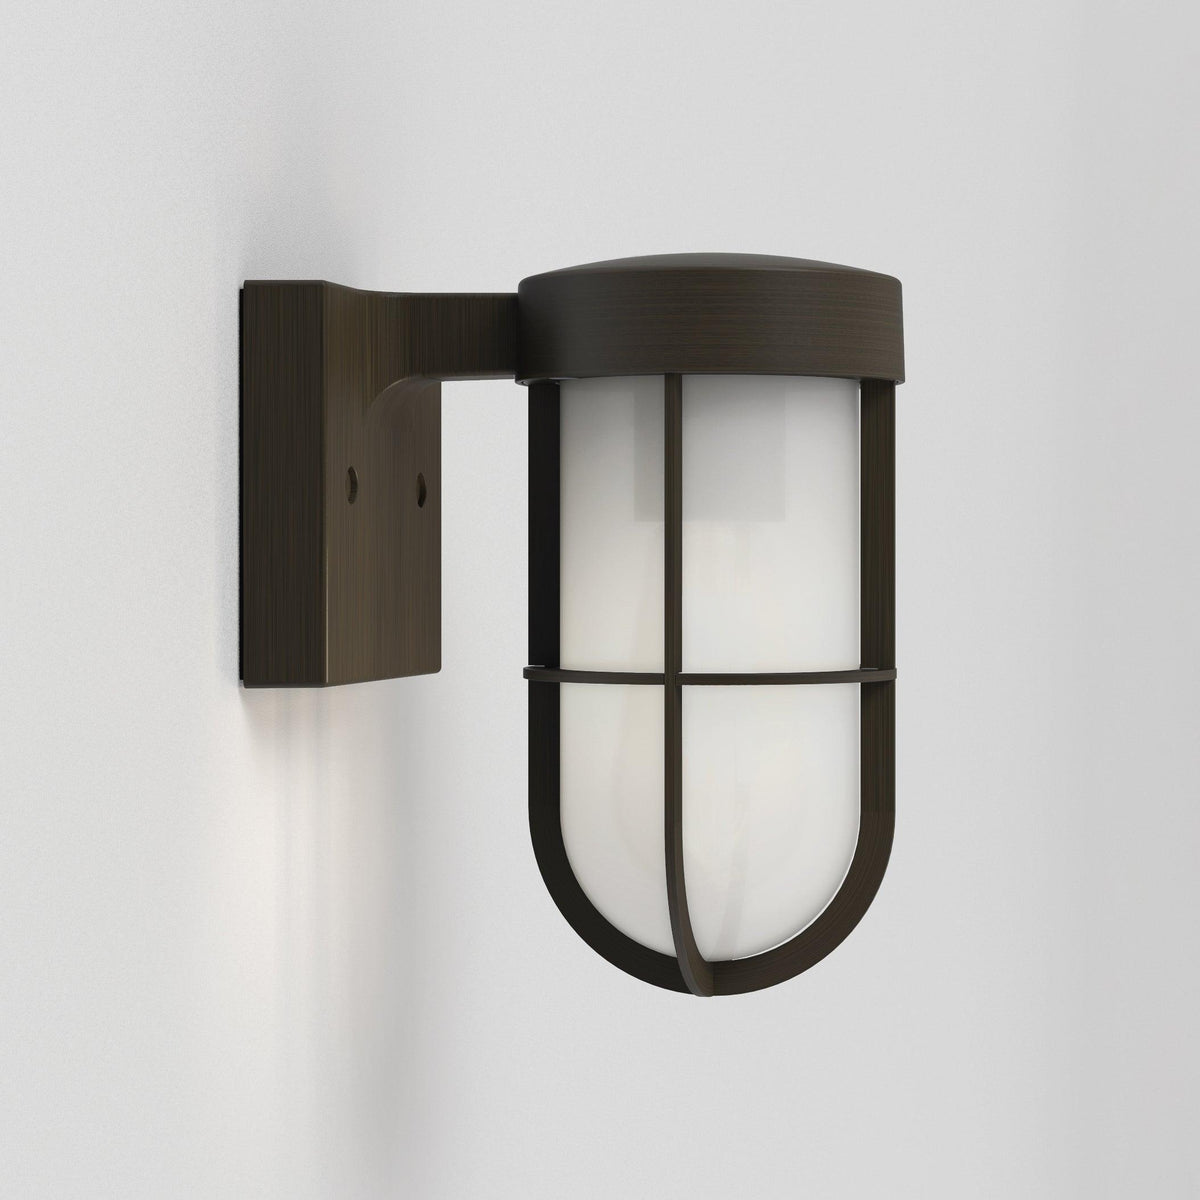 Astro Lighting - Cabin Frosted Wall Light - 1368018 | Montreal Lighting & Hardware